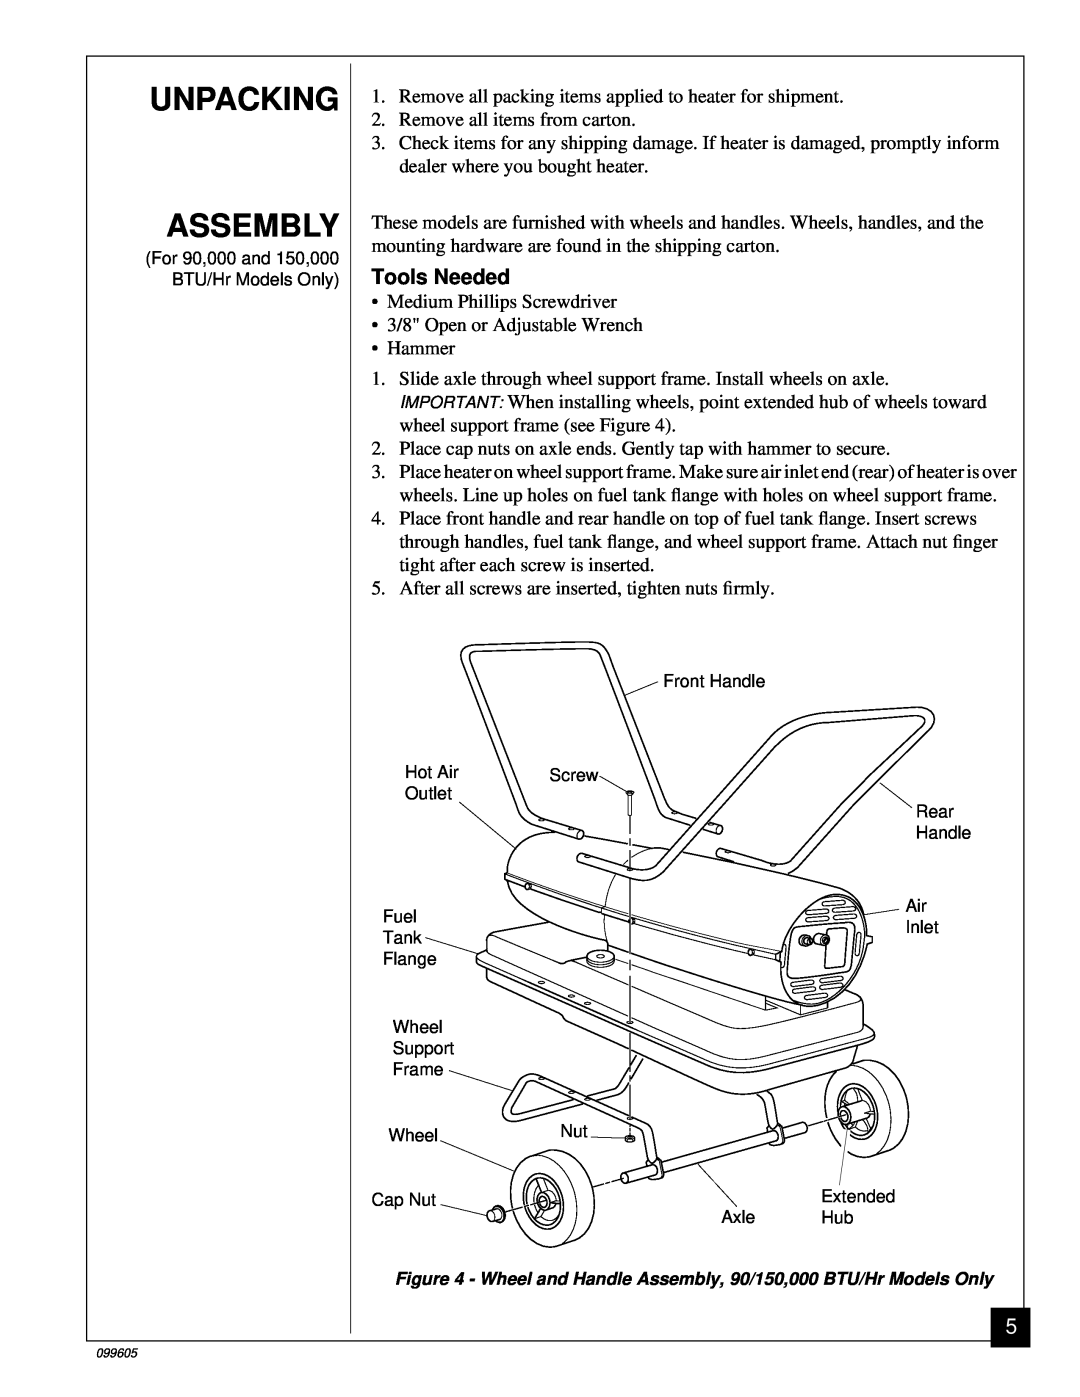 Desa H.S.I. Series owner manual Unpacking Assembly, Tools Needed 